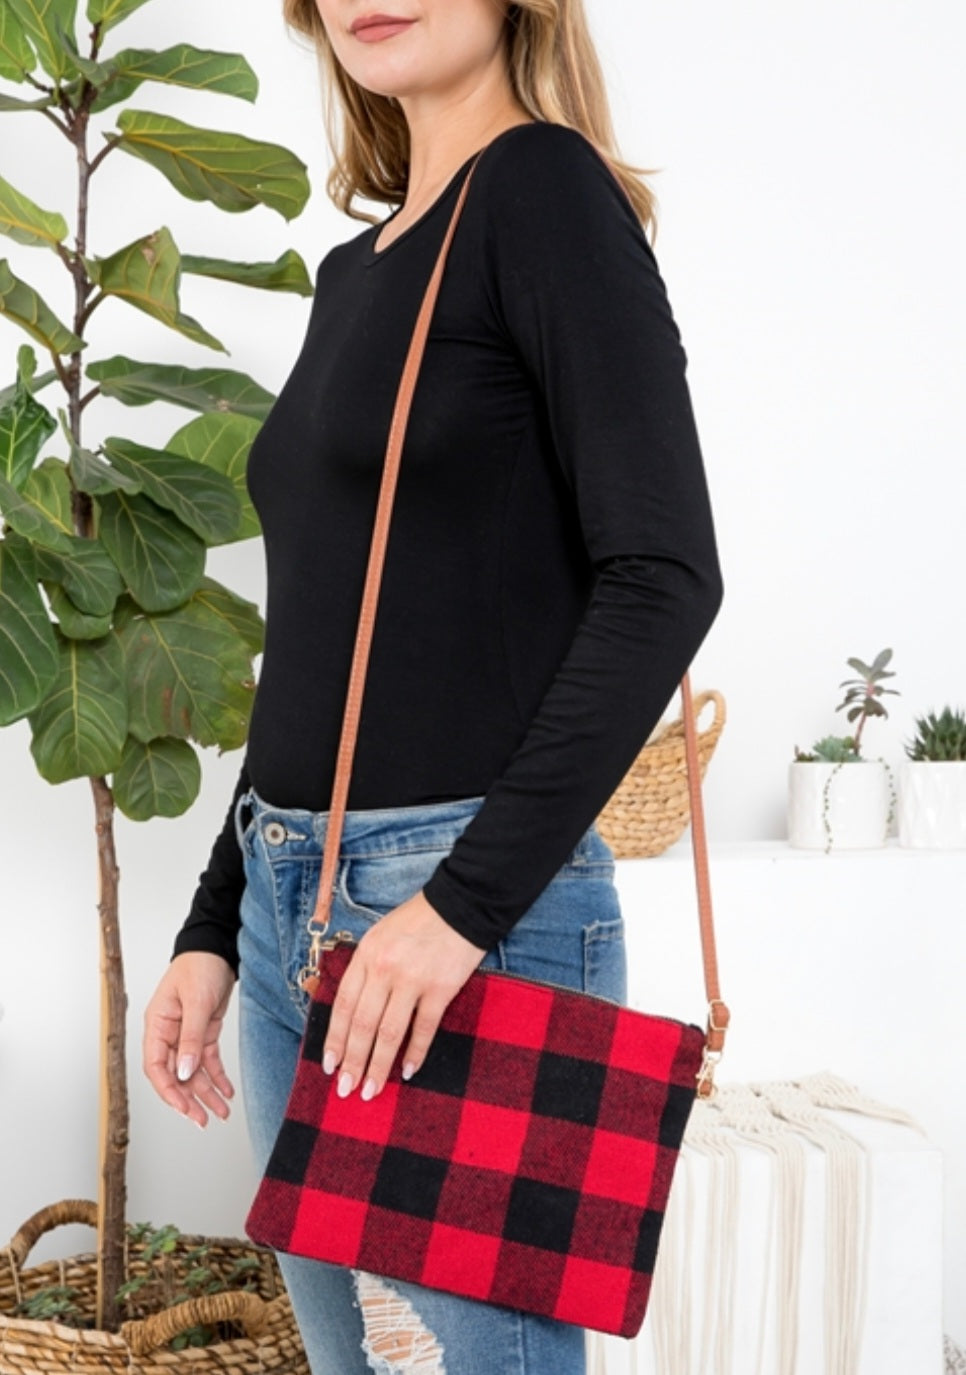 Red and Black Plaid purse